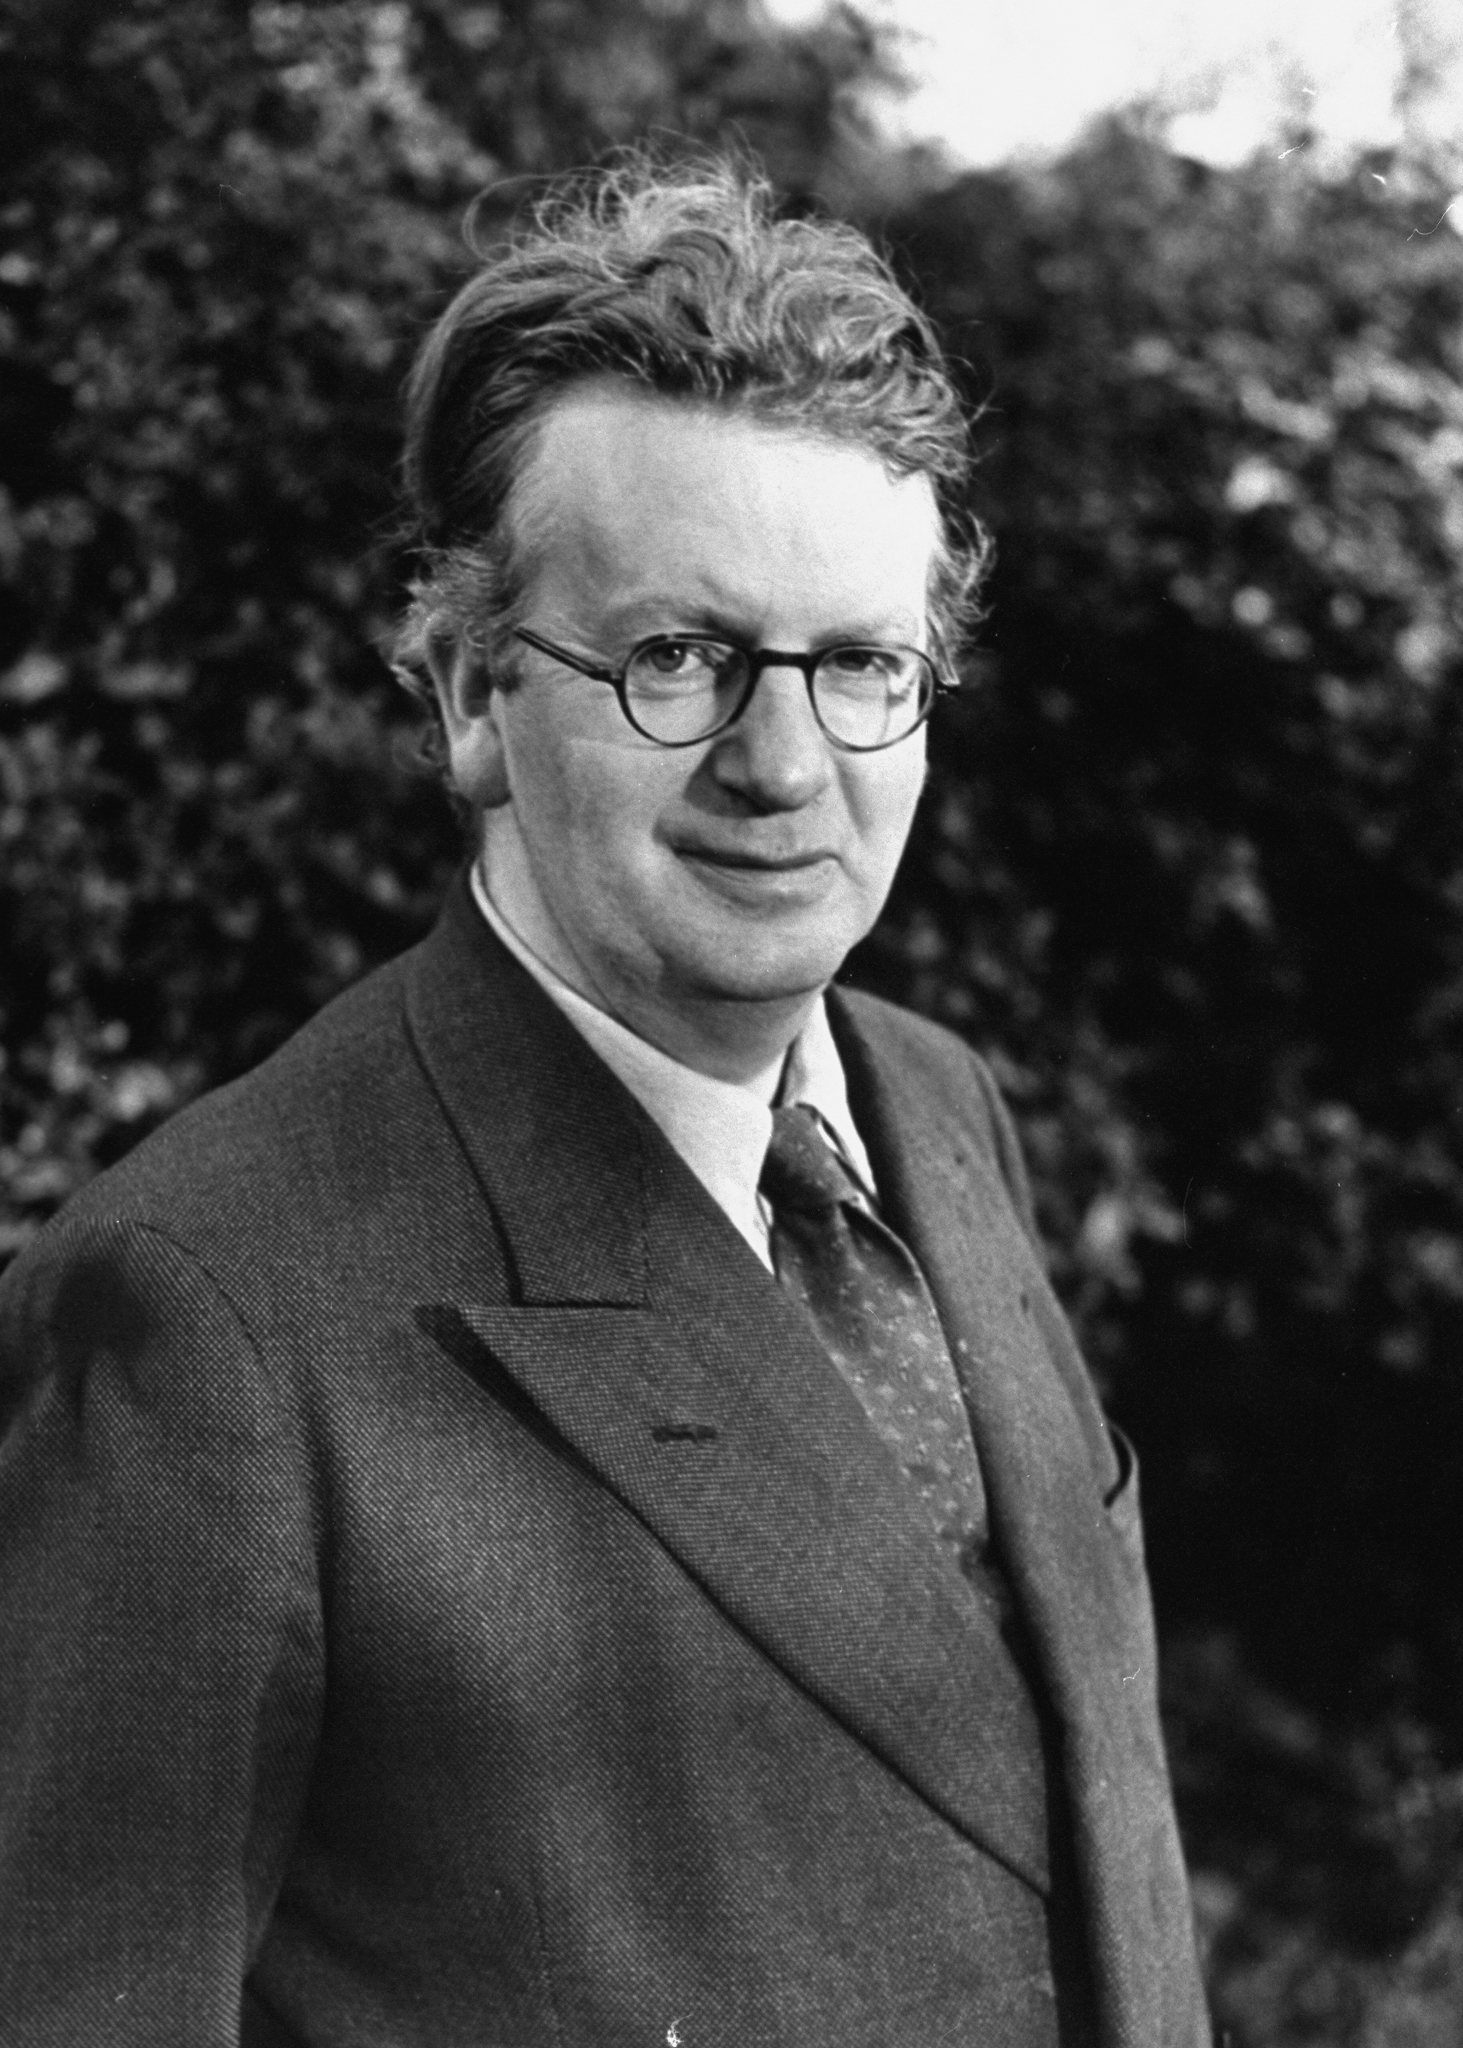 John Logie Baird (Photo Credit Required: The LIFE Picture Collection/Getty Images)